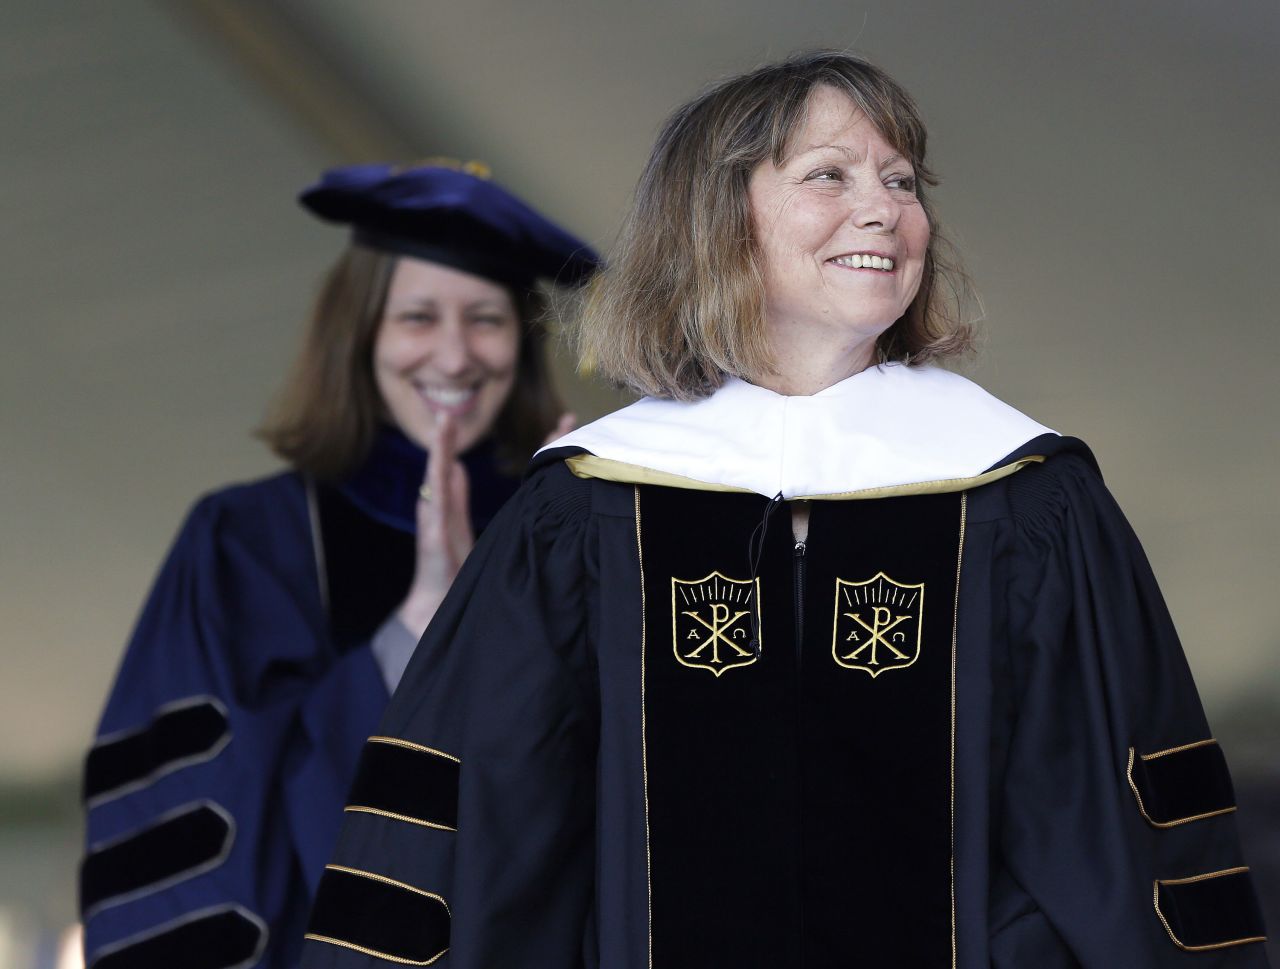 Jill Abramson, former executive editor of The New York Times, received an honorary doctorate during the commencement ceremony at Wake Forest University in Winston-Salem, North Carolina, on May 19. It was <a href="http://money.cnn.com/2014/05/19/news/companies/abramson-speech/">Abramson's first public appearance</a> since her dismissal from The New York Times.